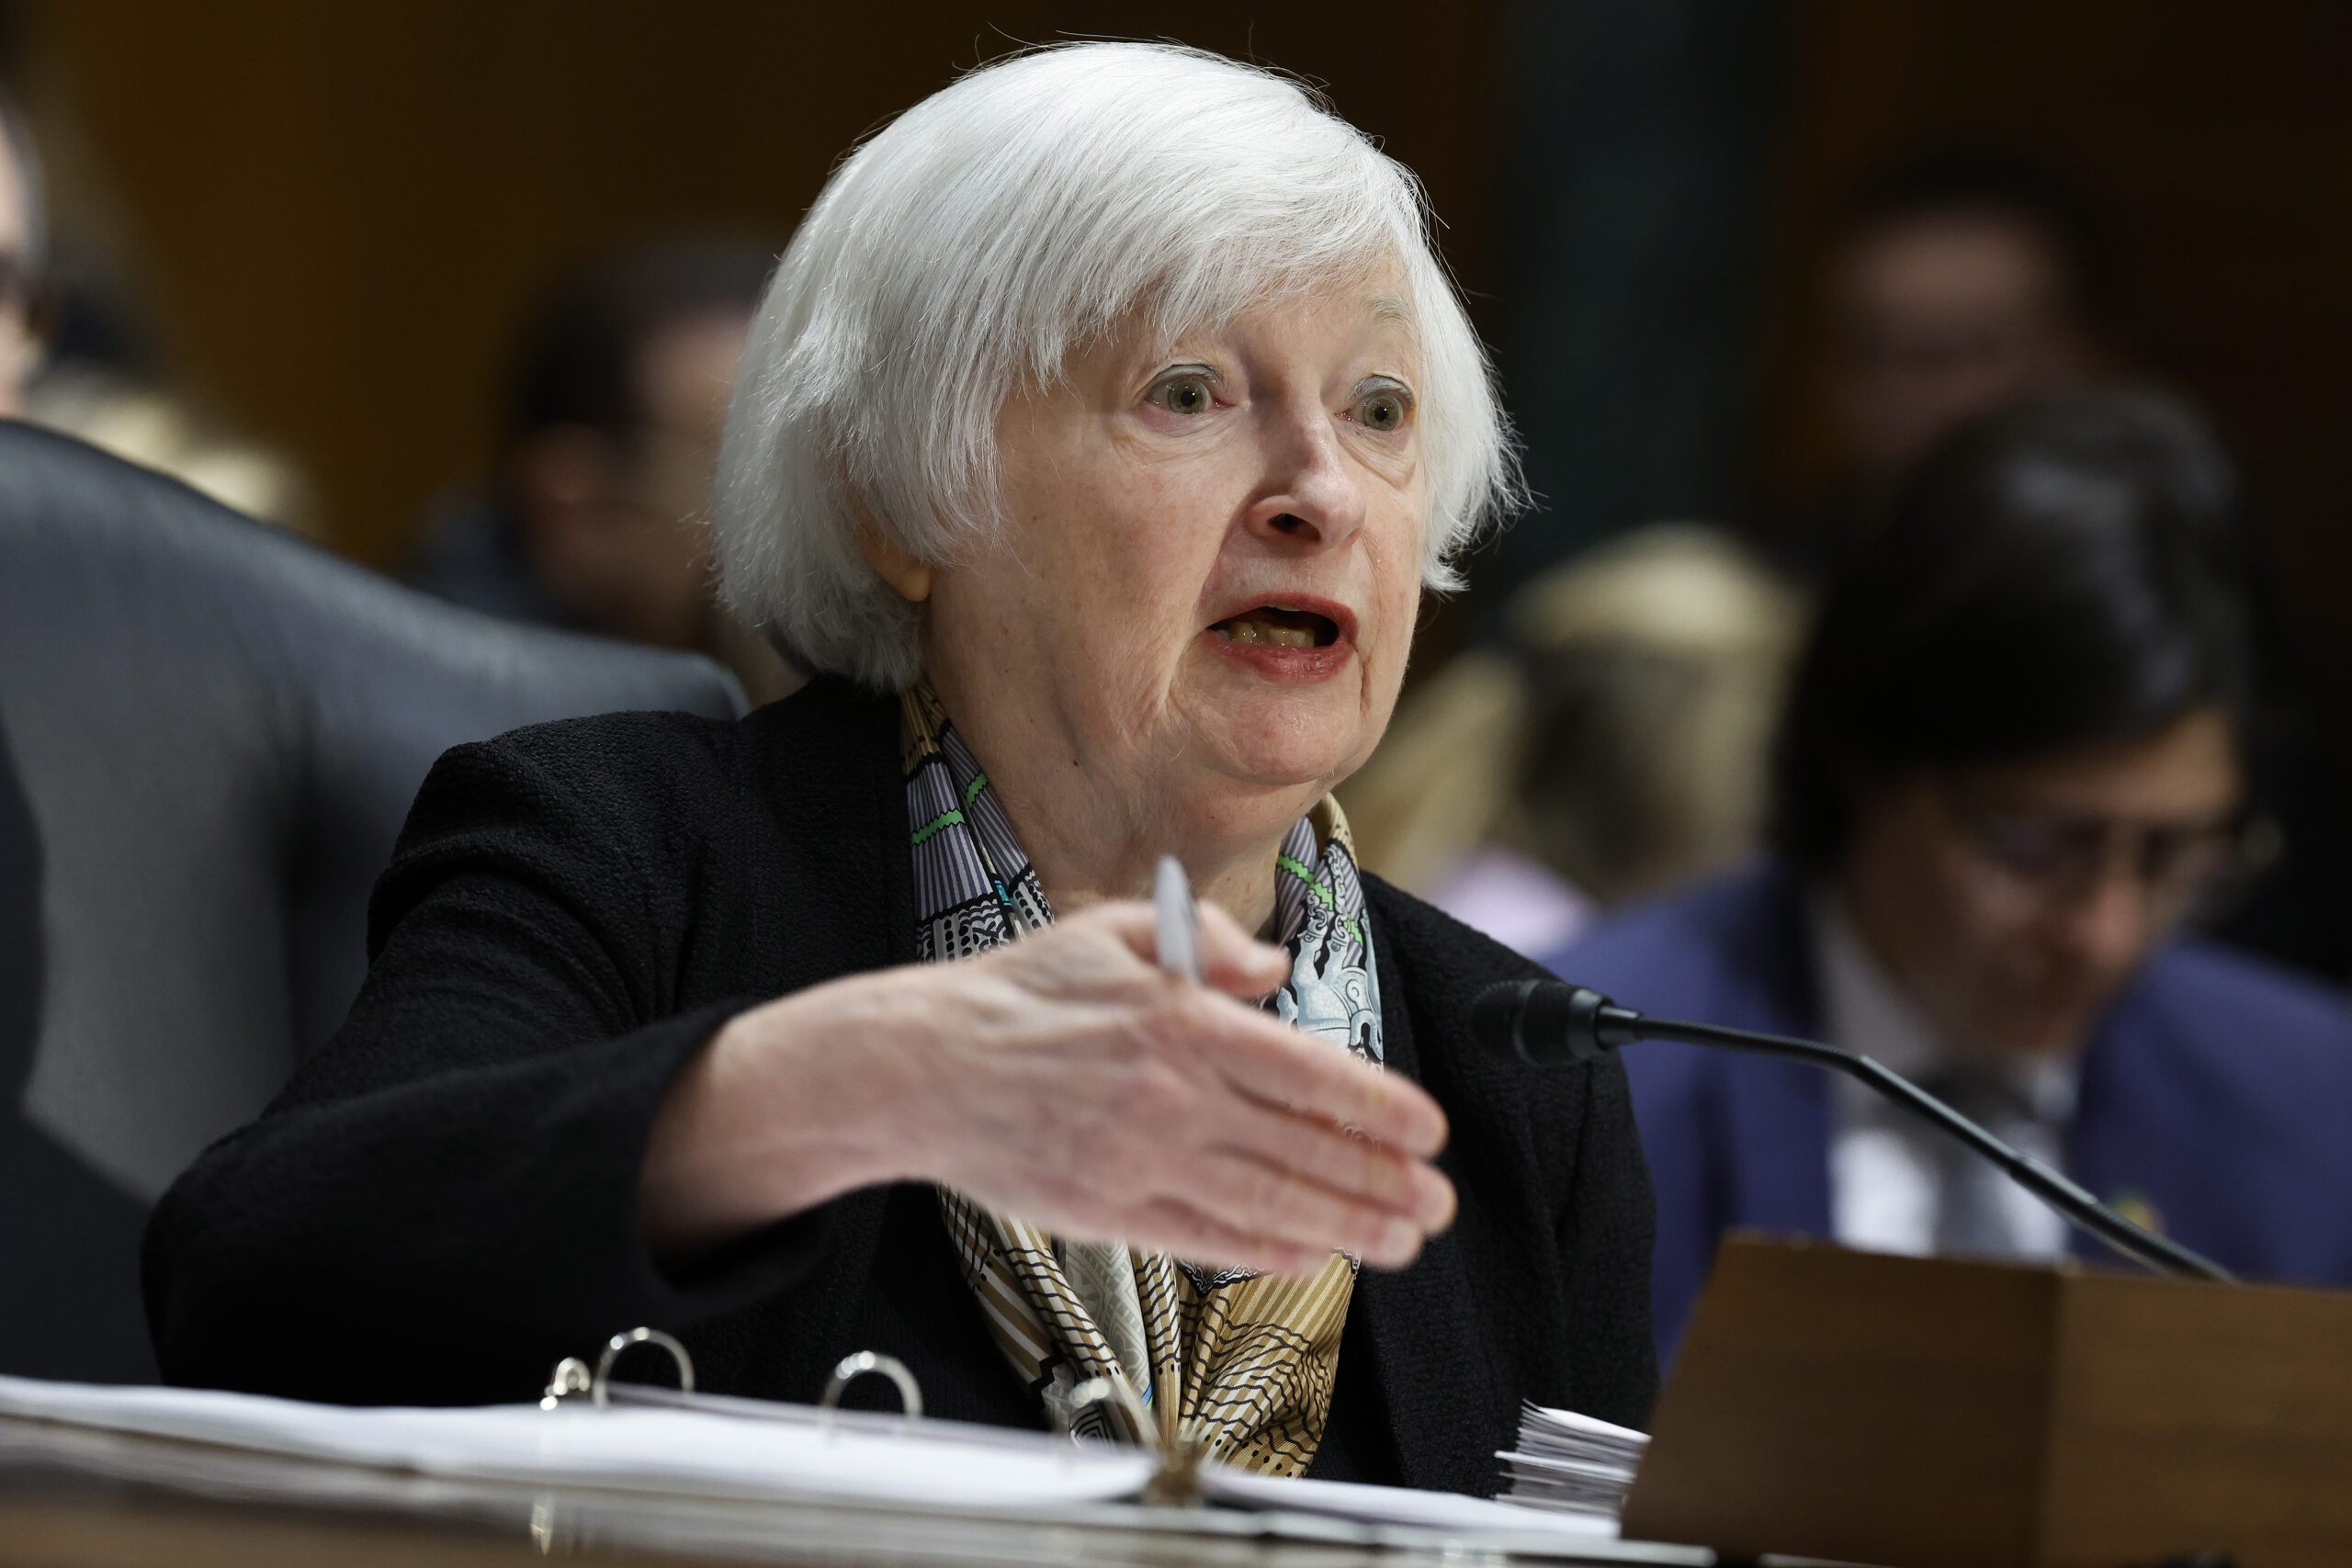 Yellen cautions CEOs on recession risk from debt ceiling battle.